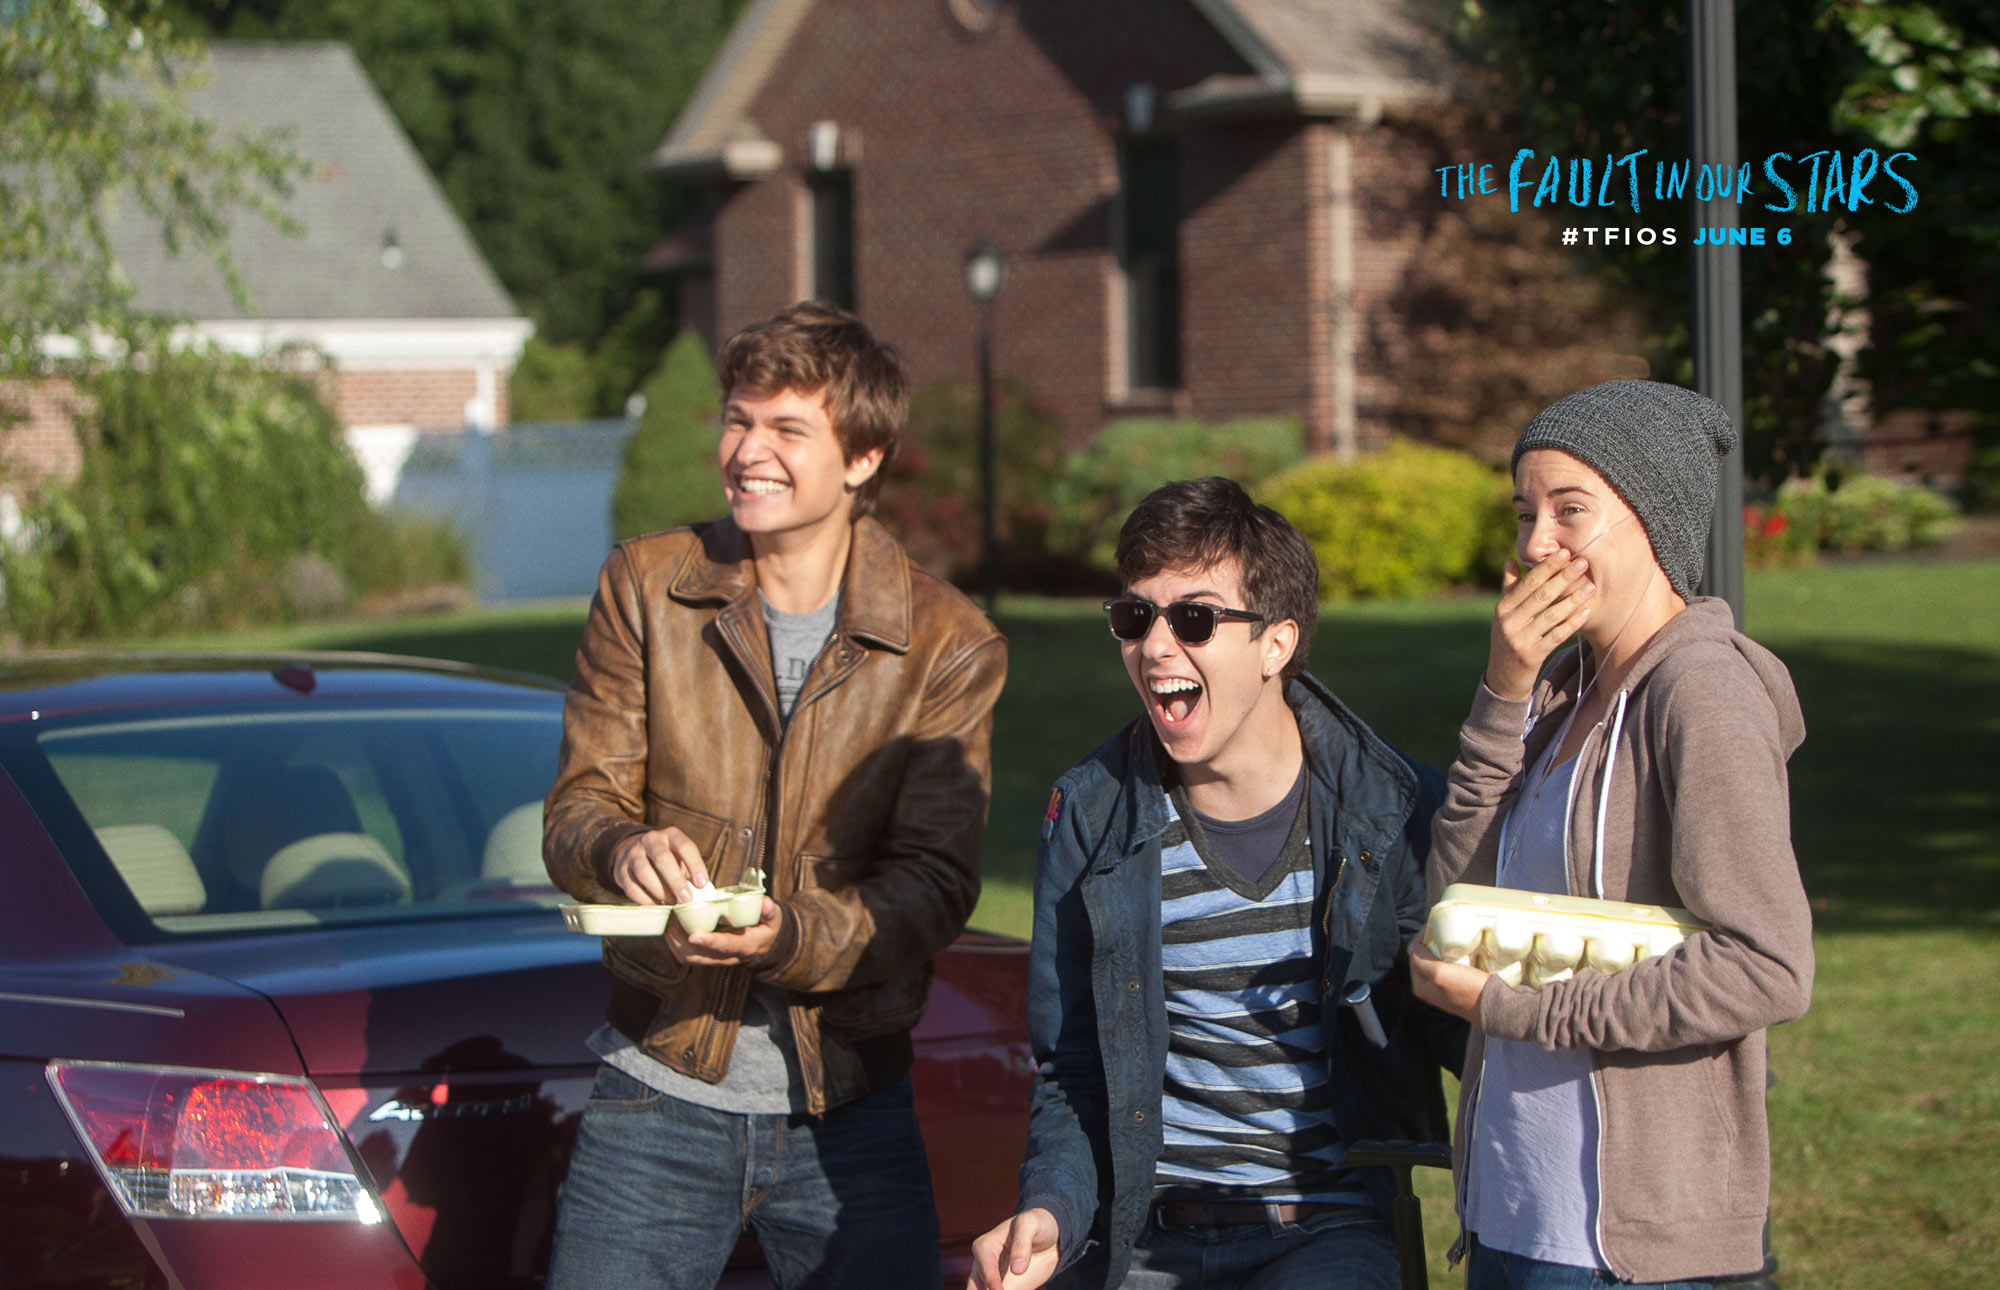 Hazel Green (Shailene Woodley), Isaac (Nat Woolf), and Augustus Waters (Ansel Elgort) throw eggs at a house. (The Fault in Our Stars official website)